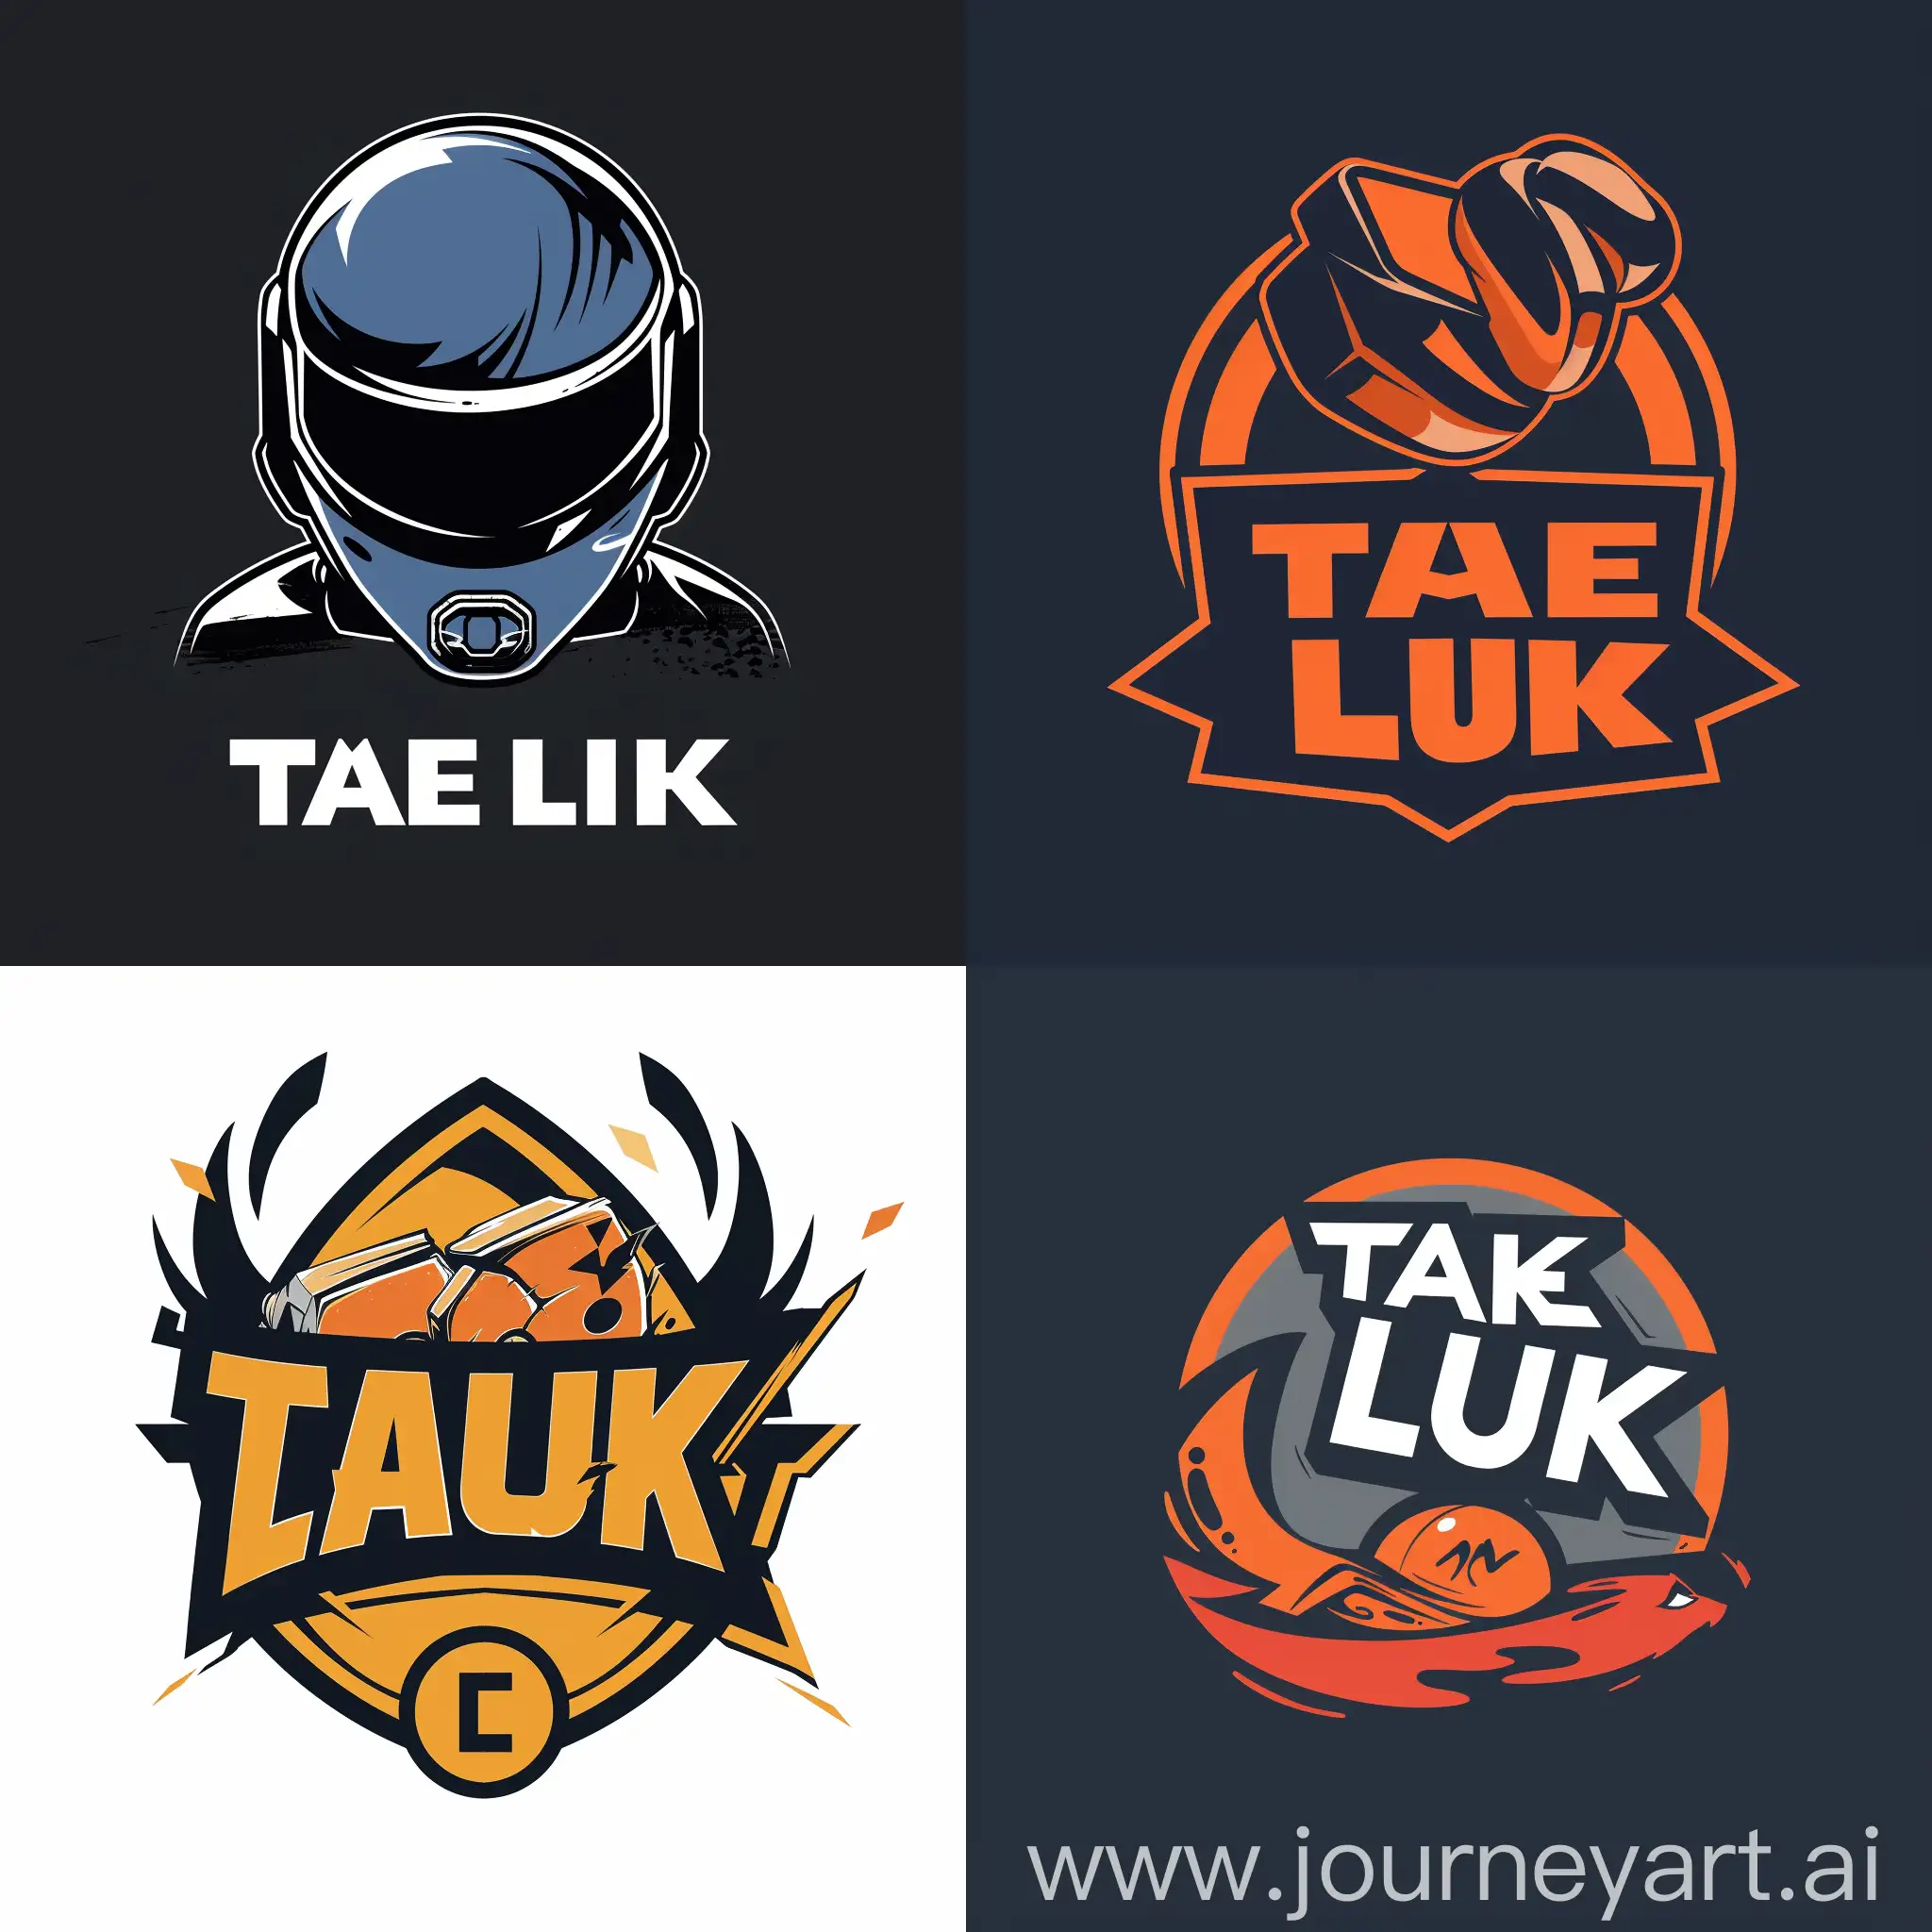 Make a logo for a YouTube channel called "Take Luck".